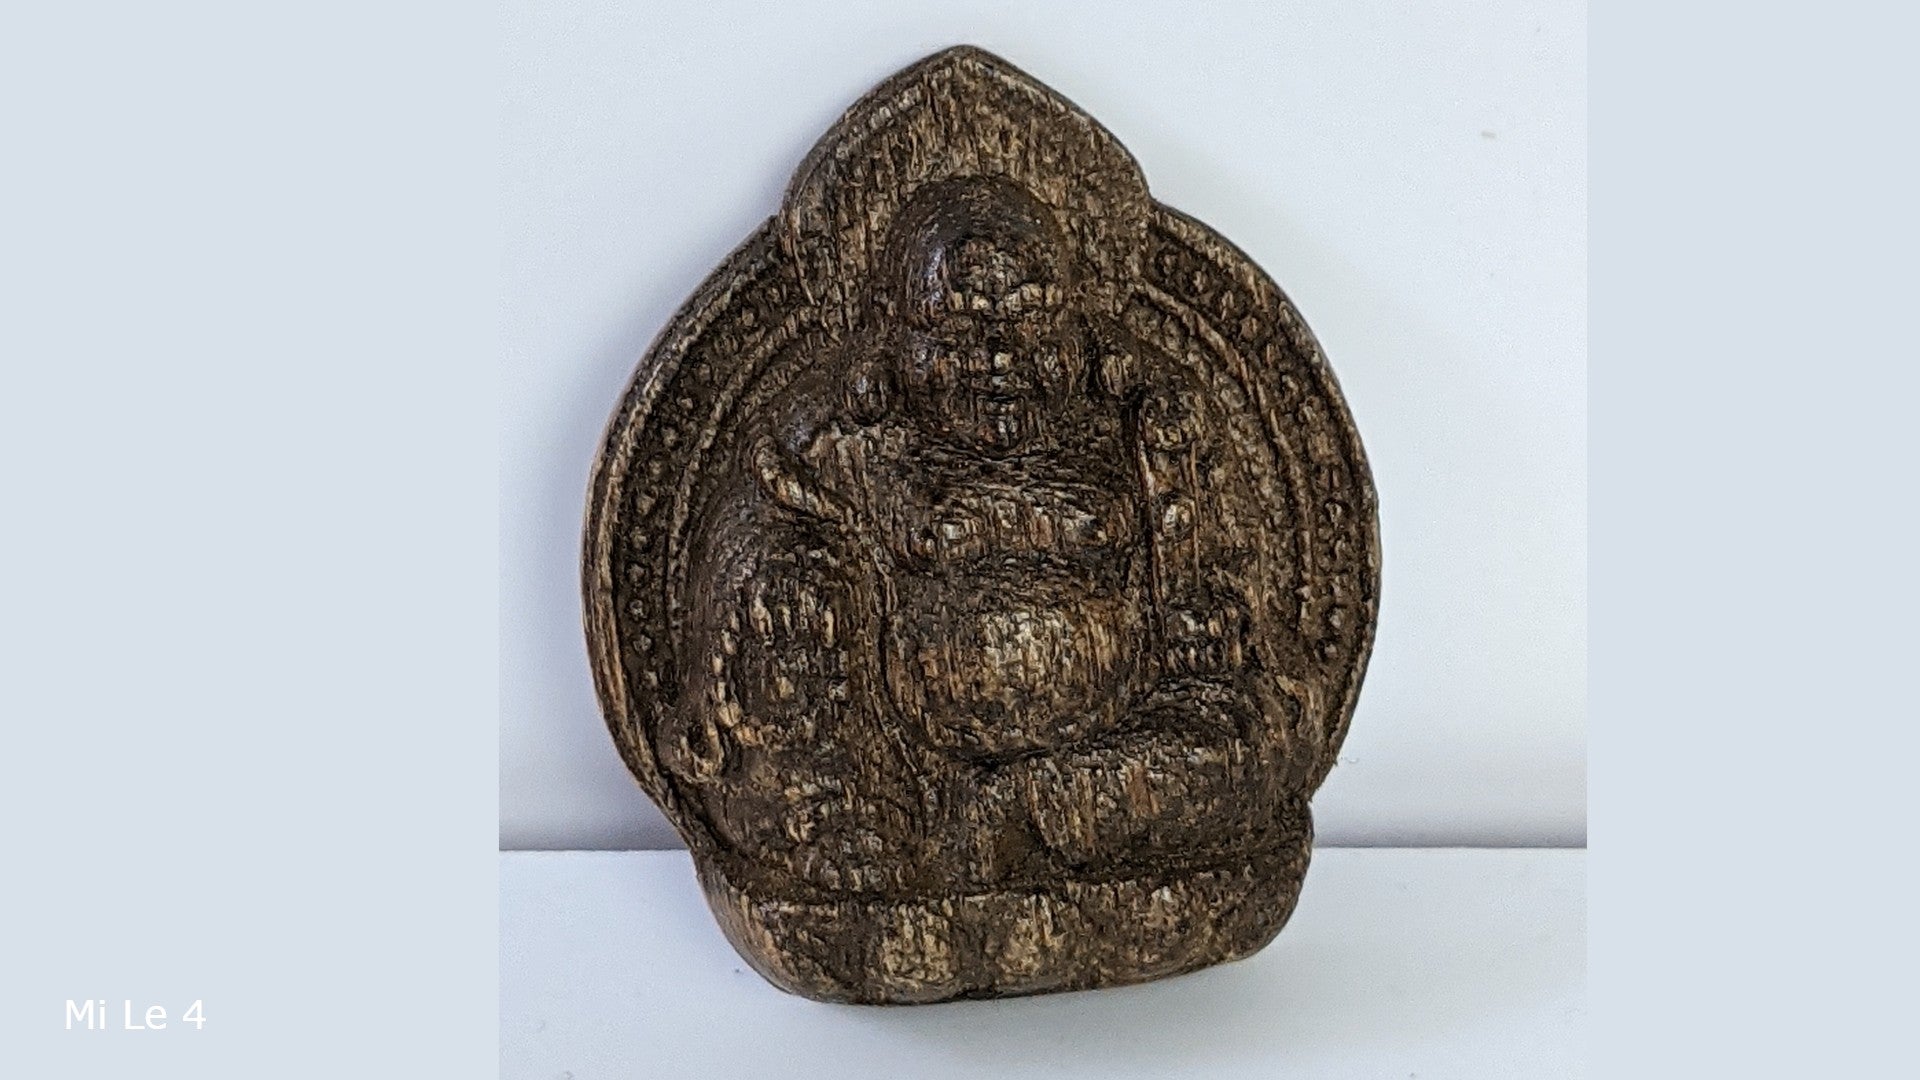 Cultivated Agarwood Pendant Guan Yin The Goddess of Mercy and Mi Le Laughing Buddha - Mi Le 4 w 3.1g